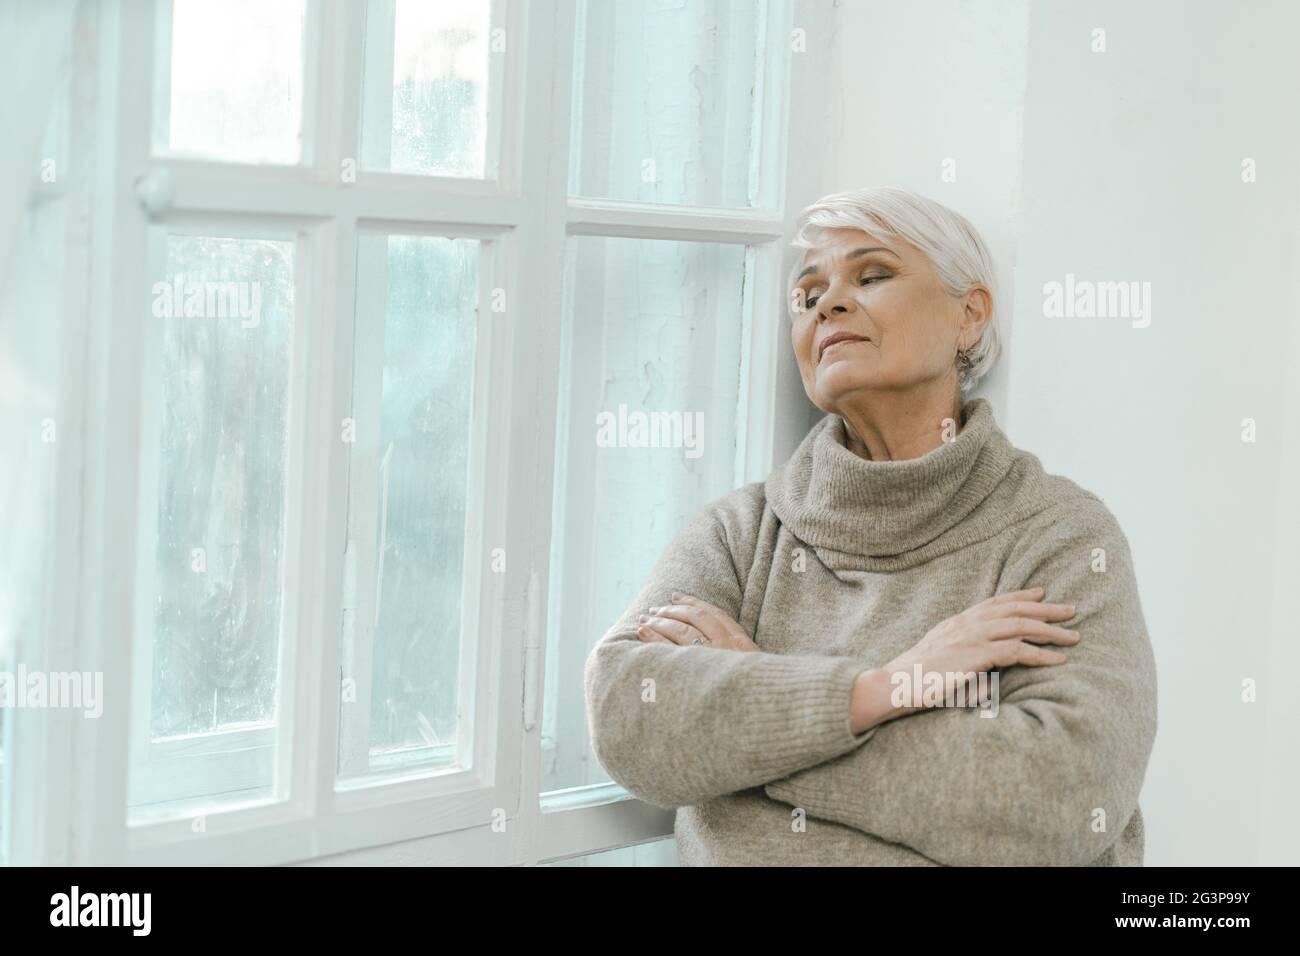 Thoughtful Senior Woman Looking At The Window Stock Photo - Alamy